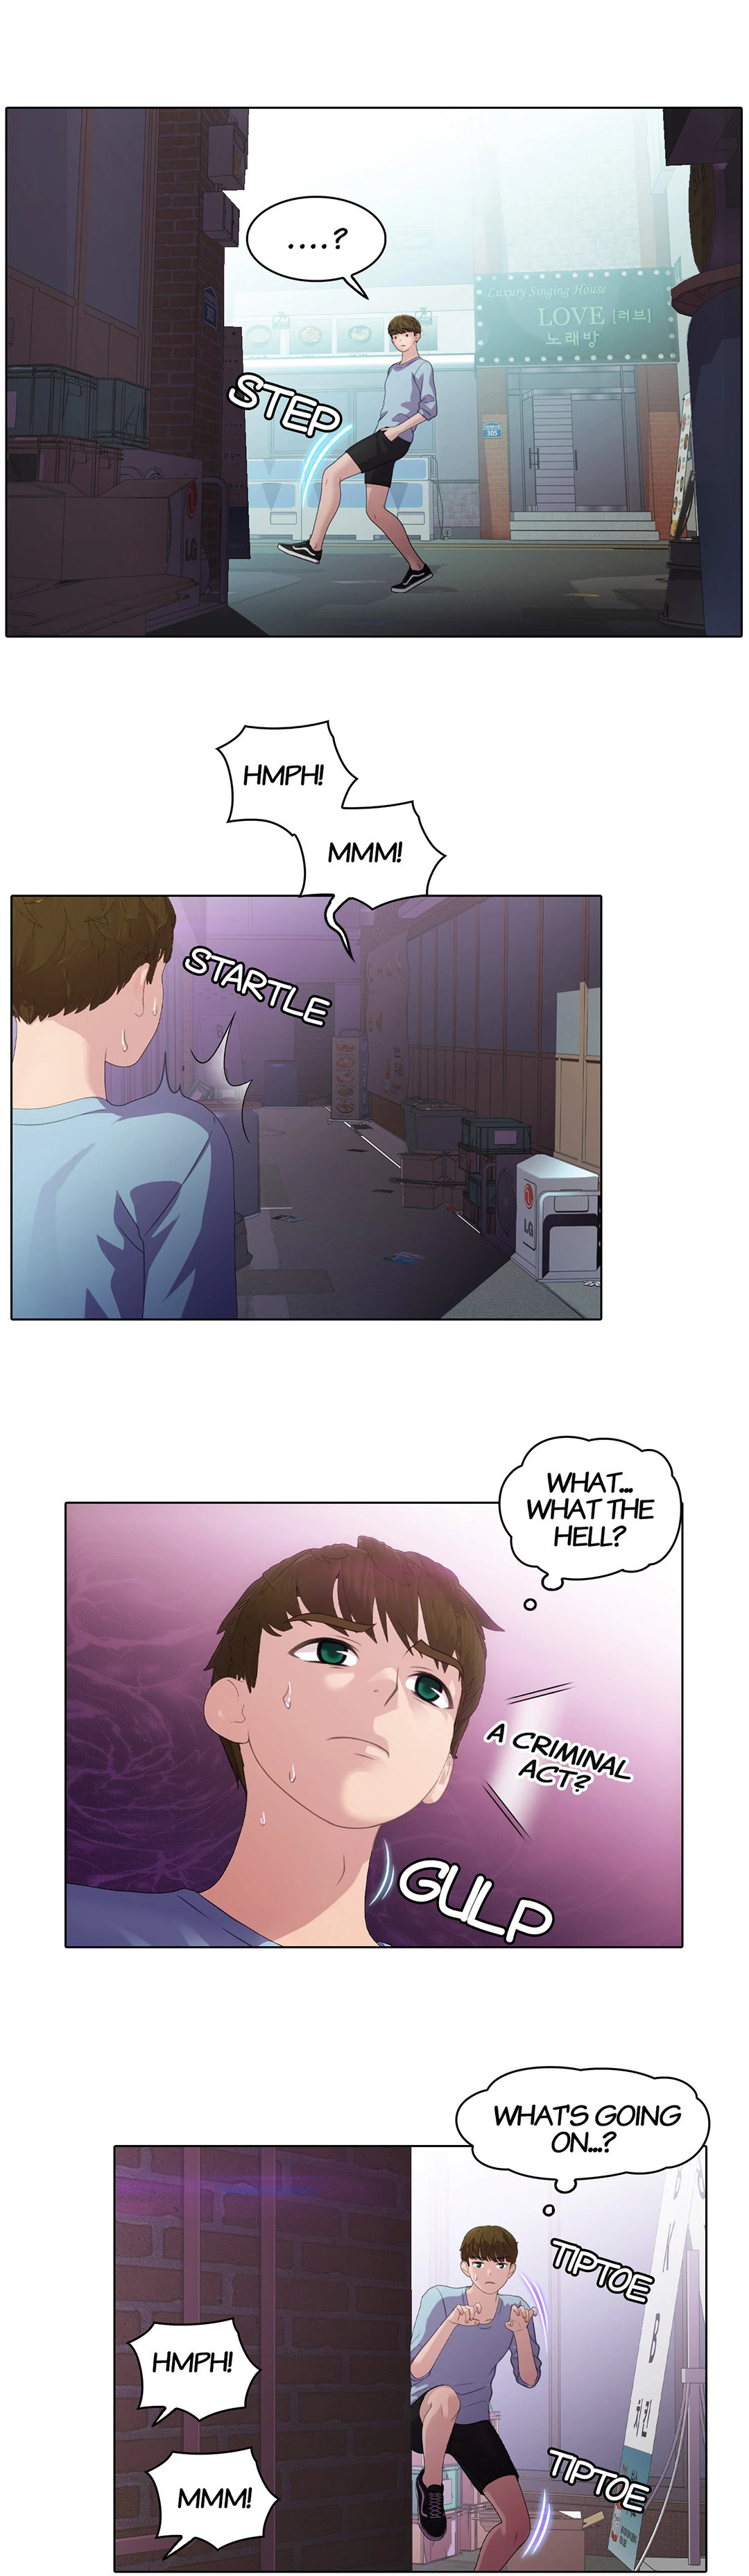 My Friend’s Sister - Chapter 4 Page 6